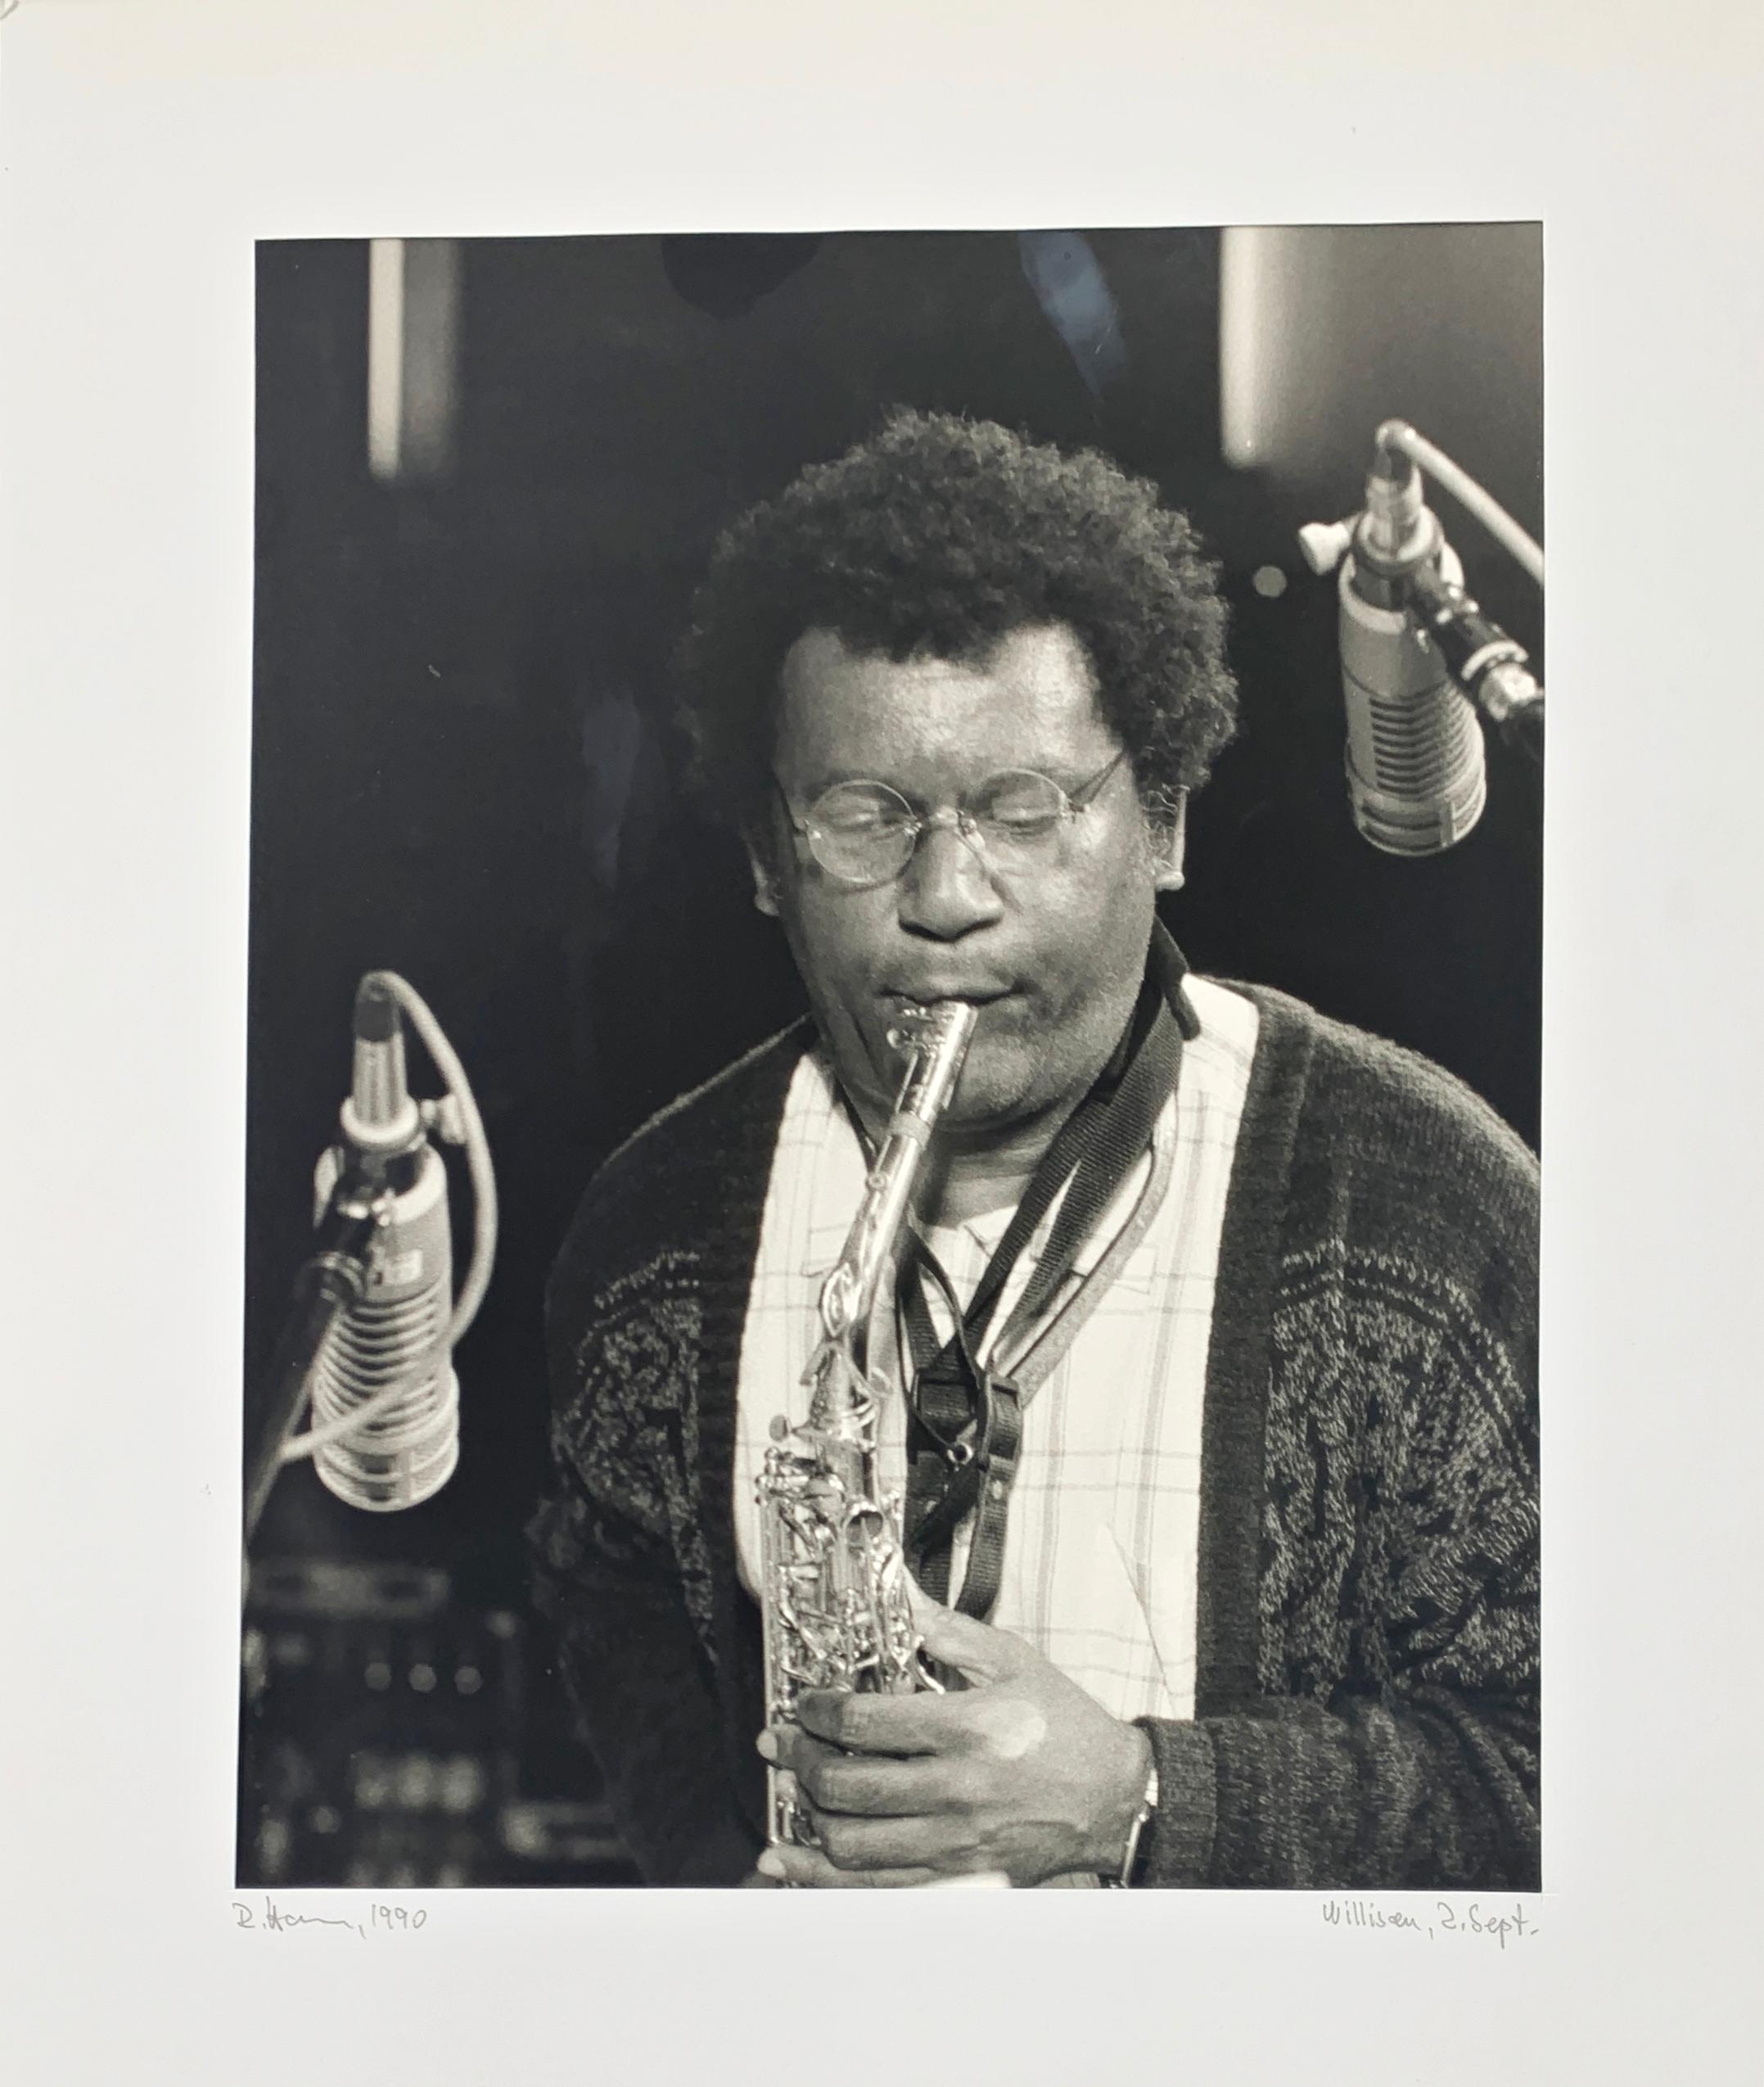 Rolf Hans
Frankfurt 1938 - 1996 Basel
Anthony Braxton, Willisau, September 2, 1990
Signed and dated on the passe-partout
Signed, dated and titled on the reverse
30.1 x 23.6 cm

Provenance: estate of the artist

The painter, sculptor and photographer